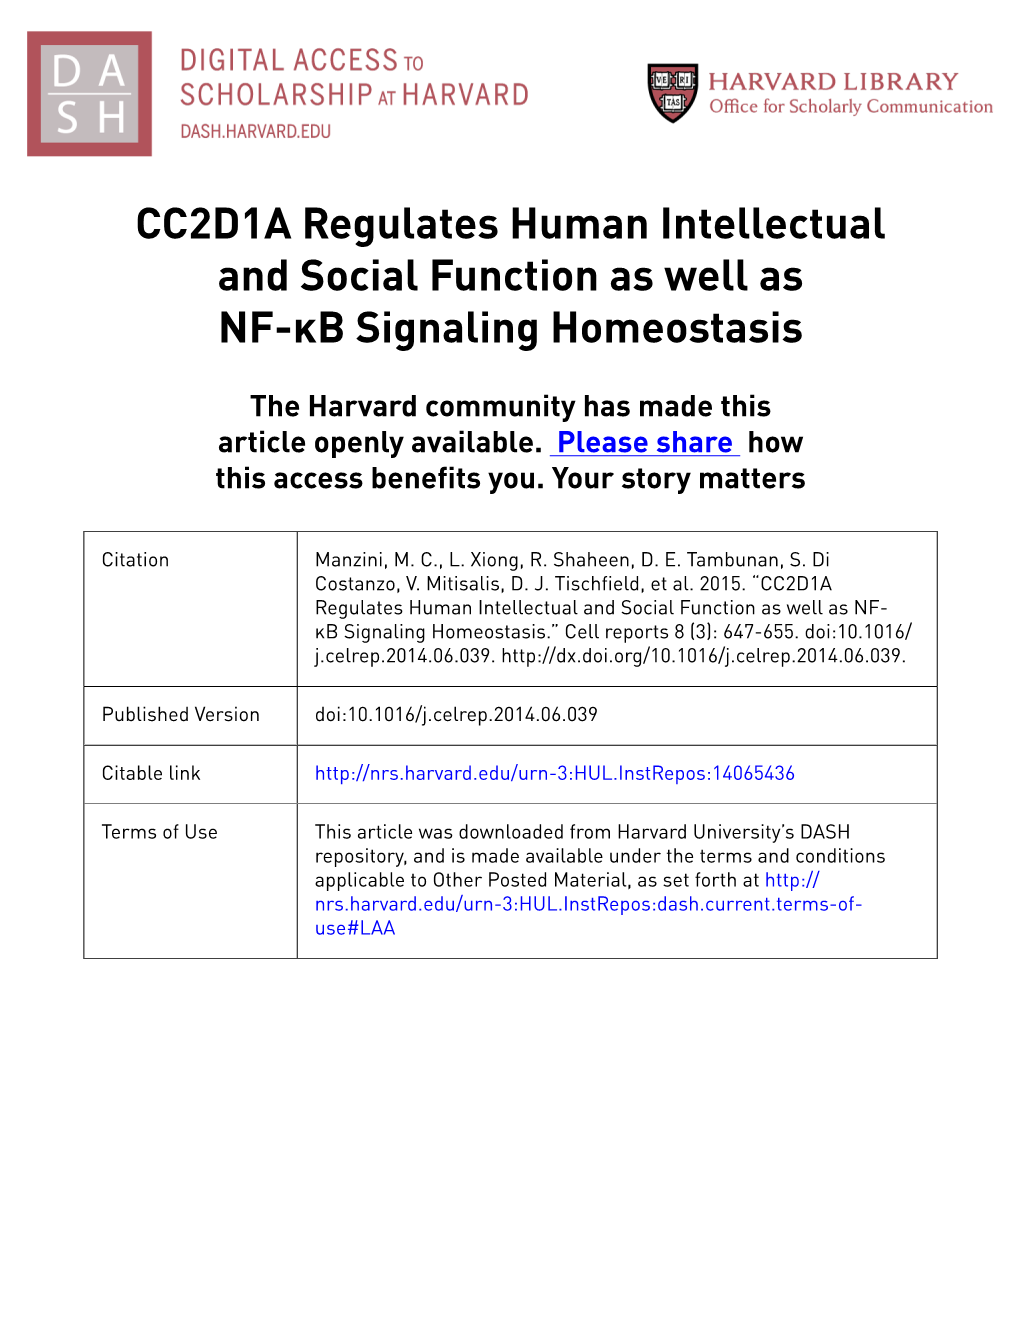 CC2D1A Regulates Human Intellectual and Social Function As Well As NF-Κb Signaling Homeostasis